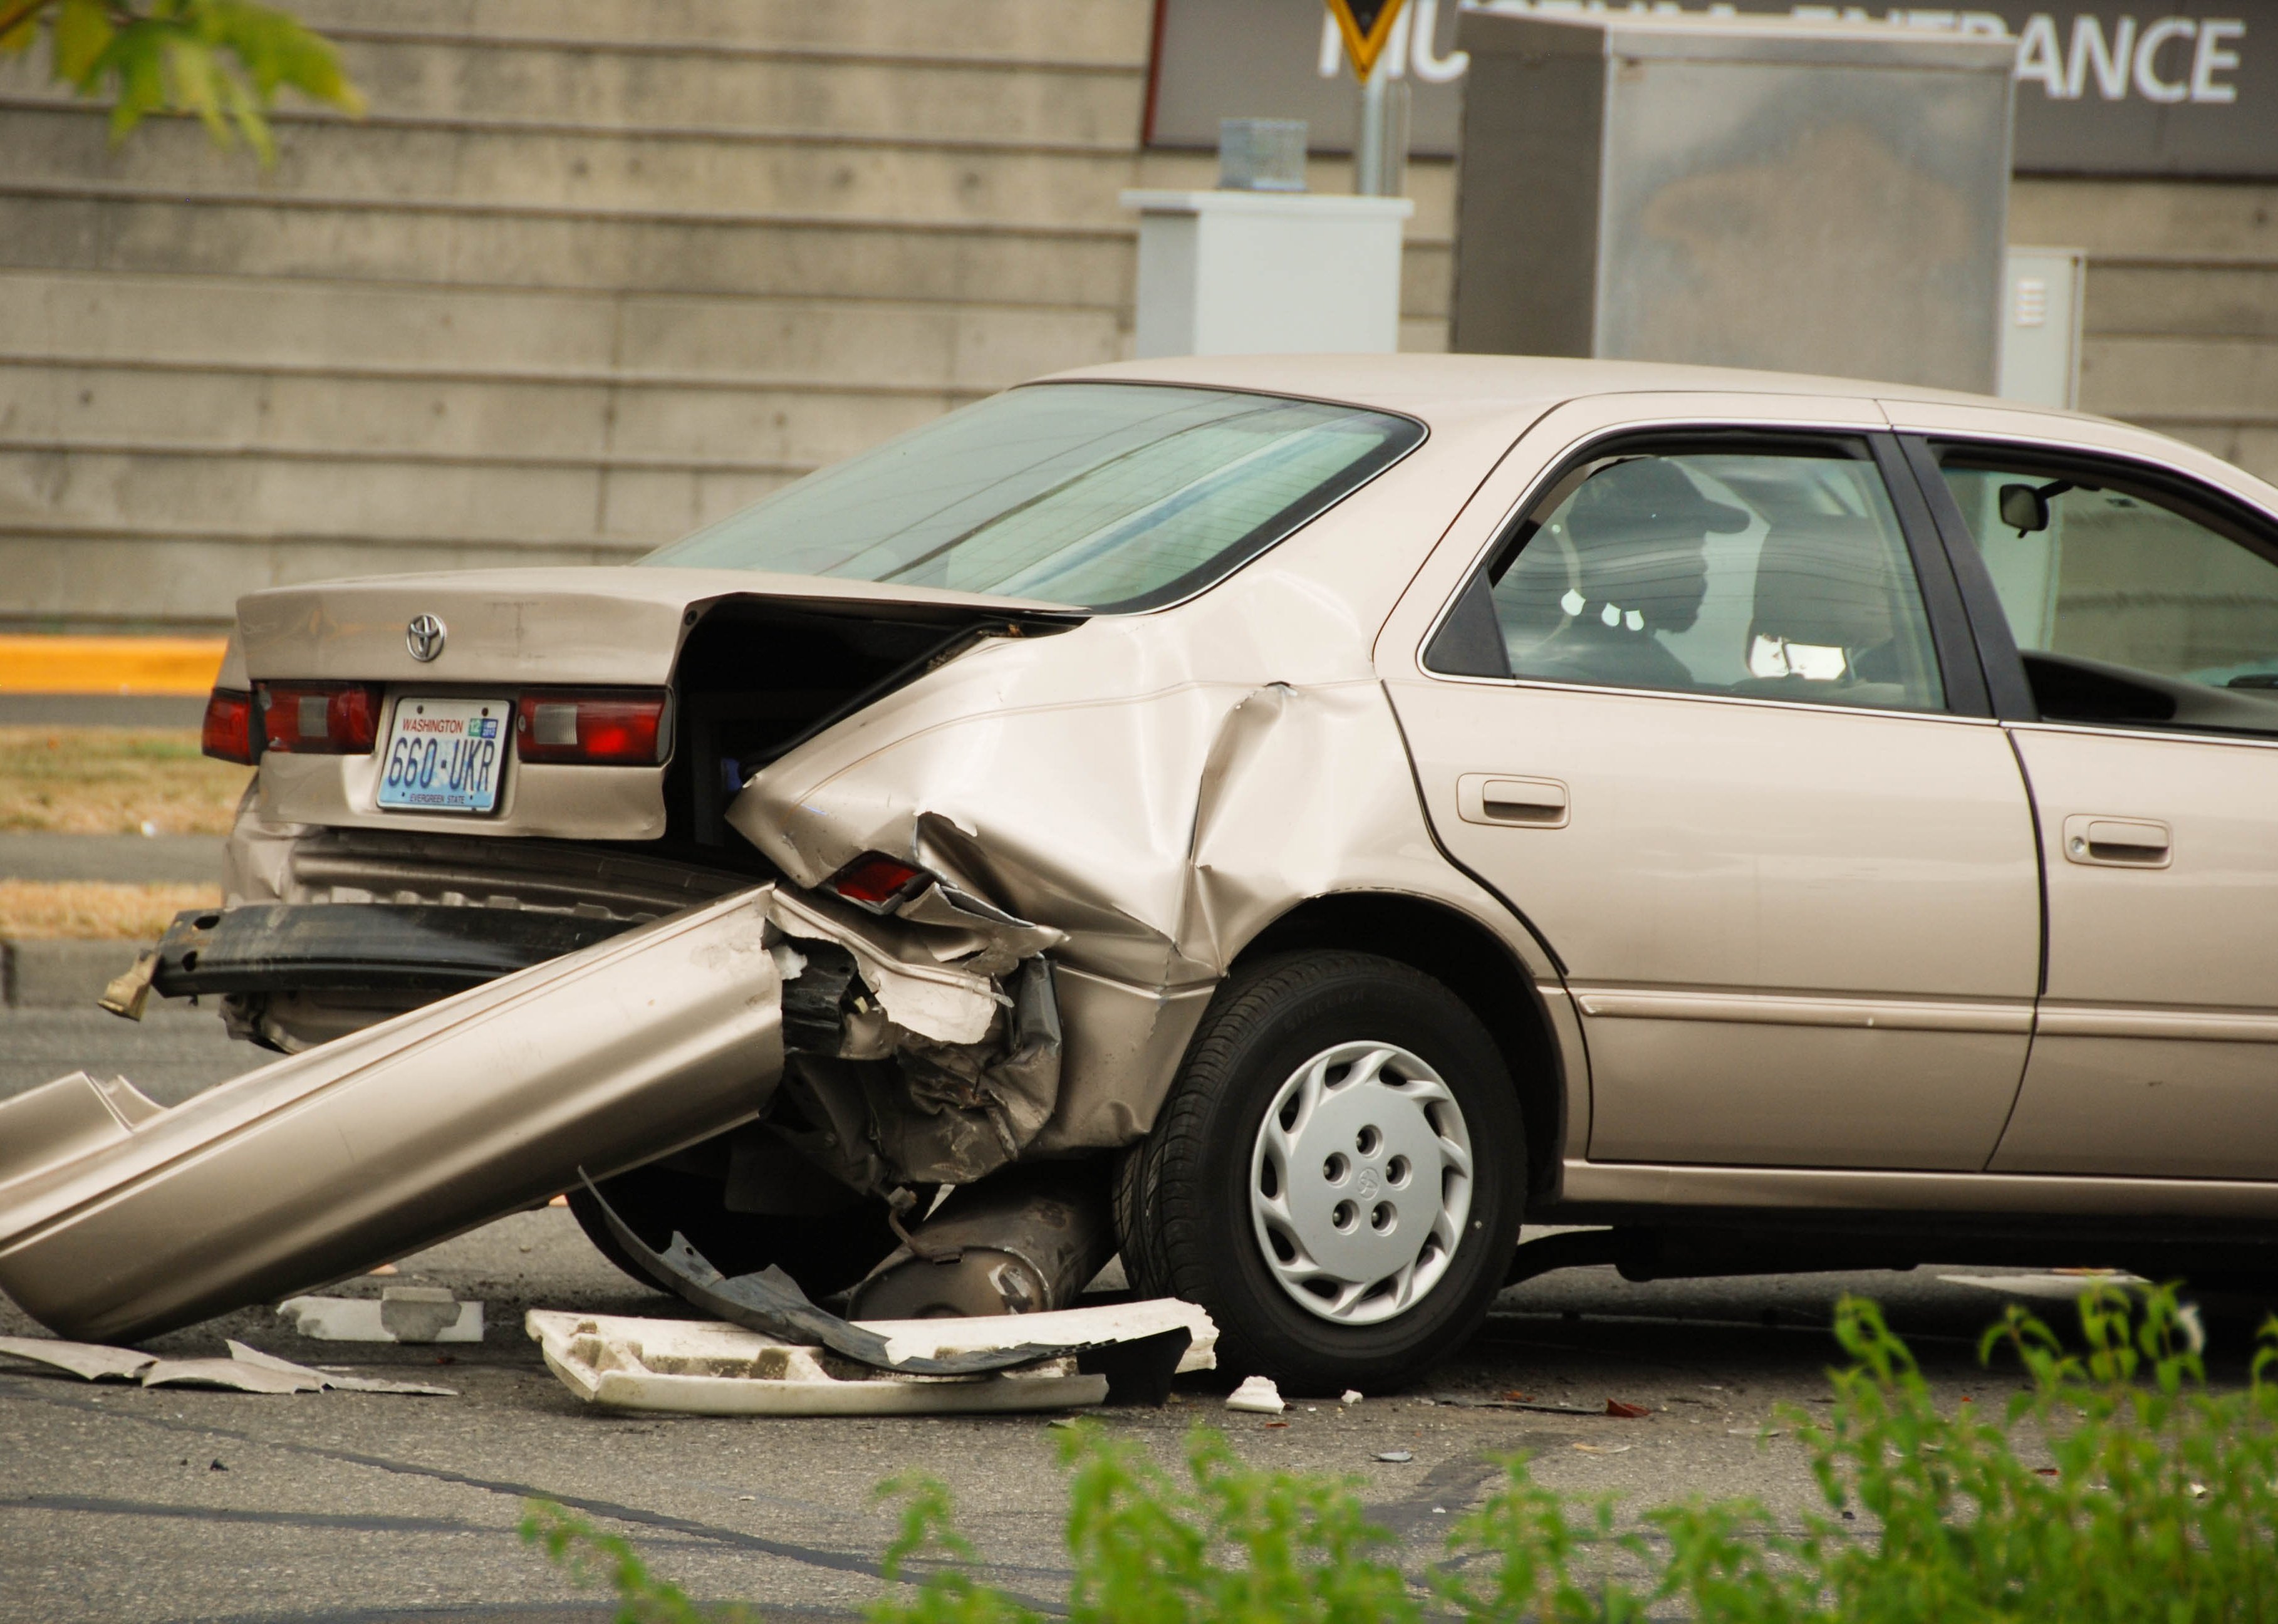 The damaged rear of a car as a result of an accident.